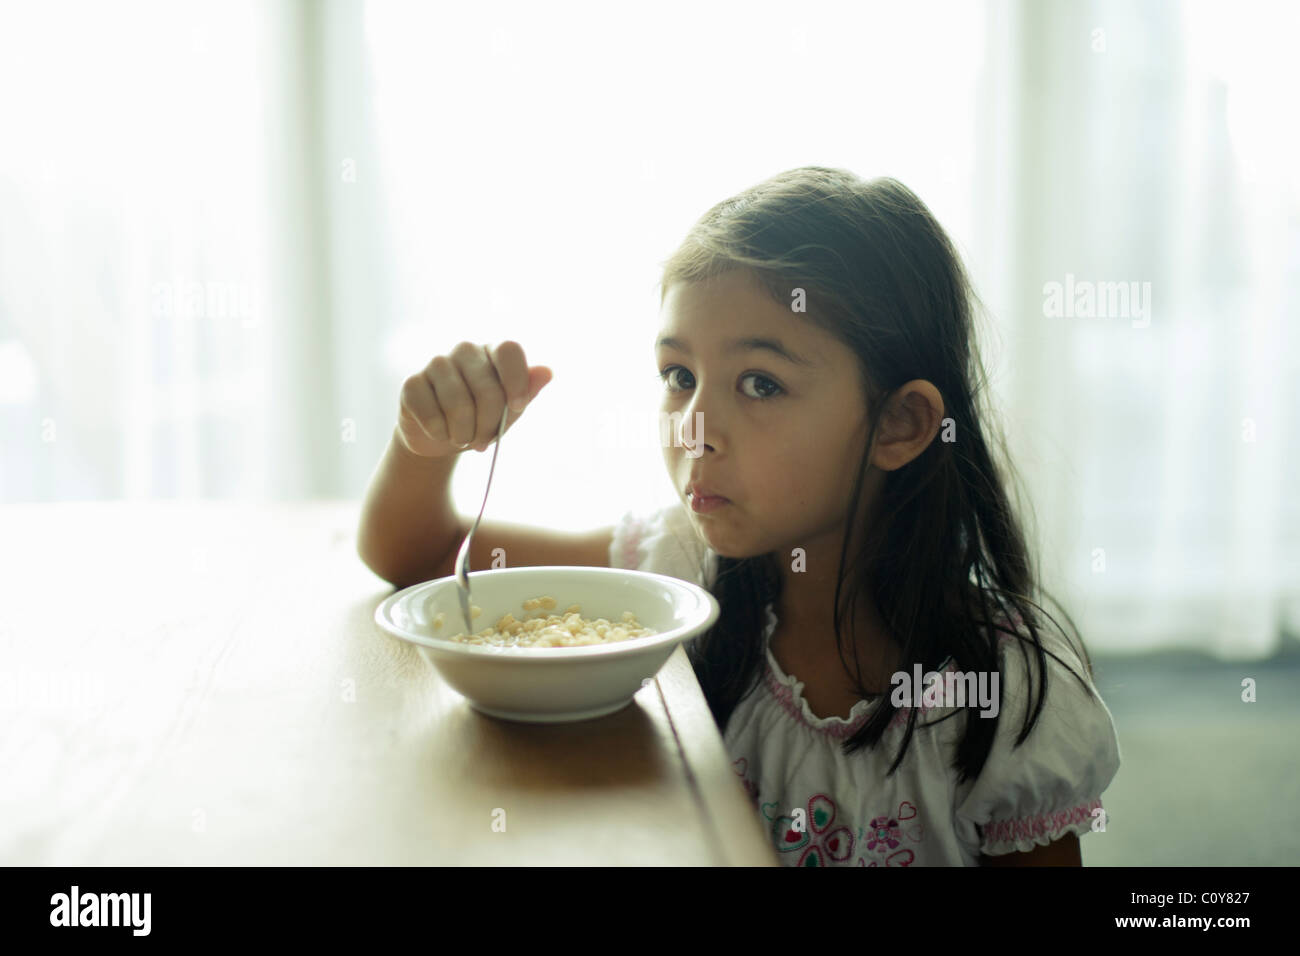 Six year old girl with bowl of breakfast cereal Stock Photo